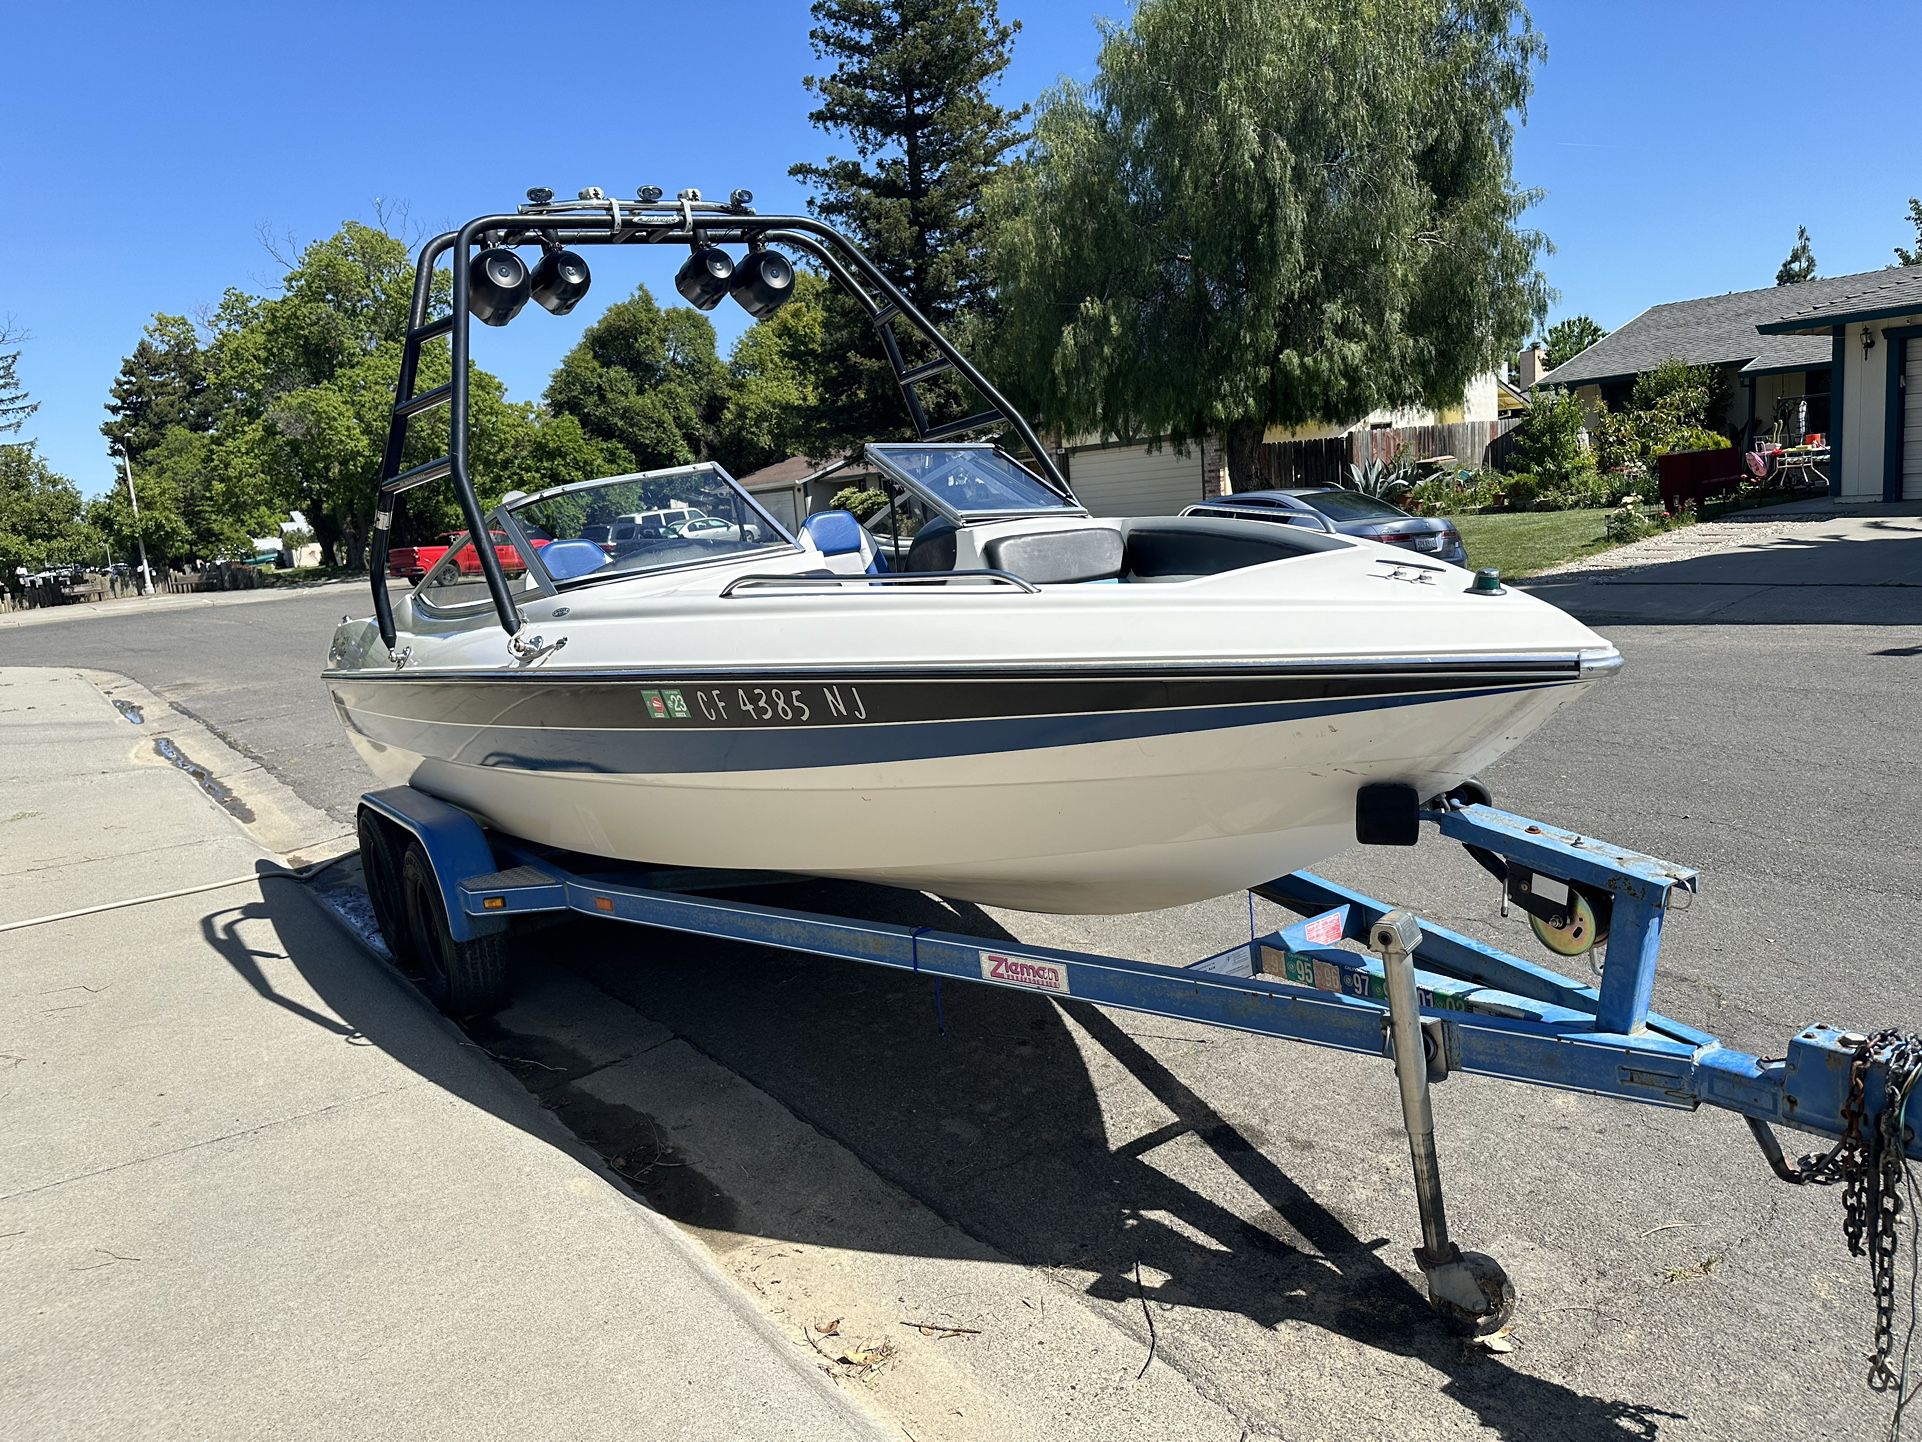 1993 Sting Ray 23ft Boat 